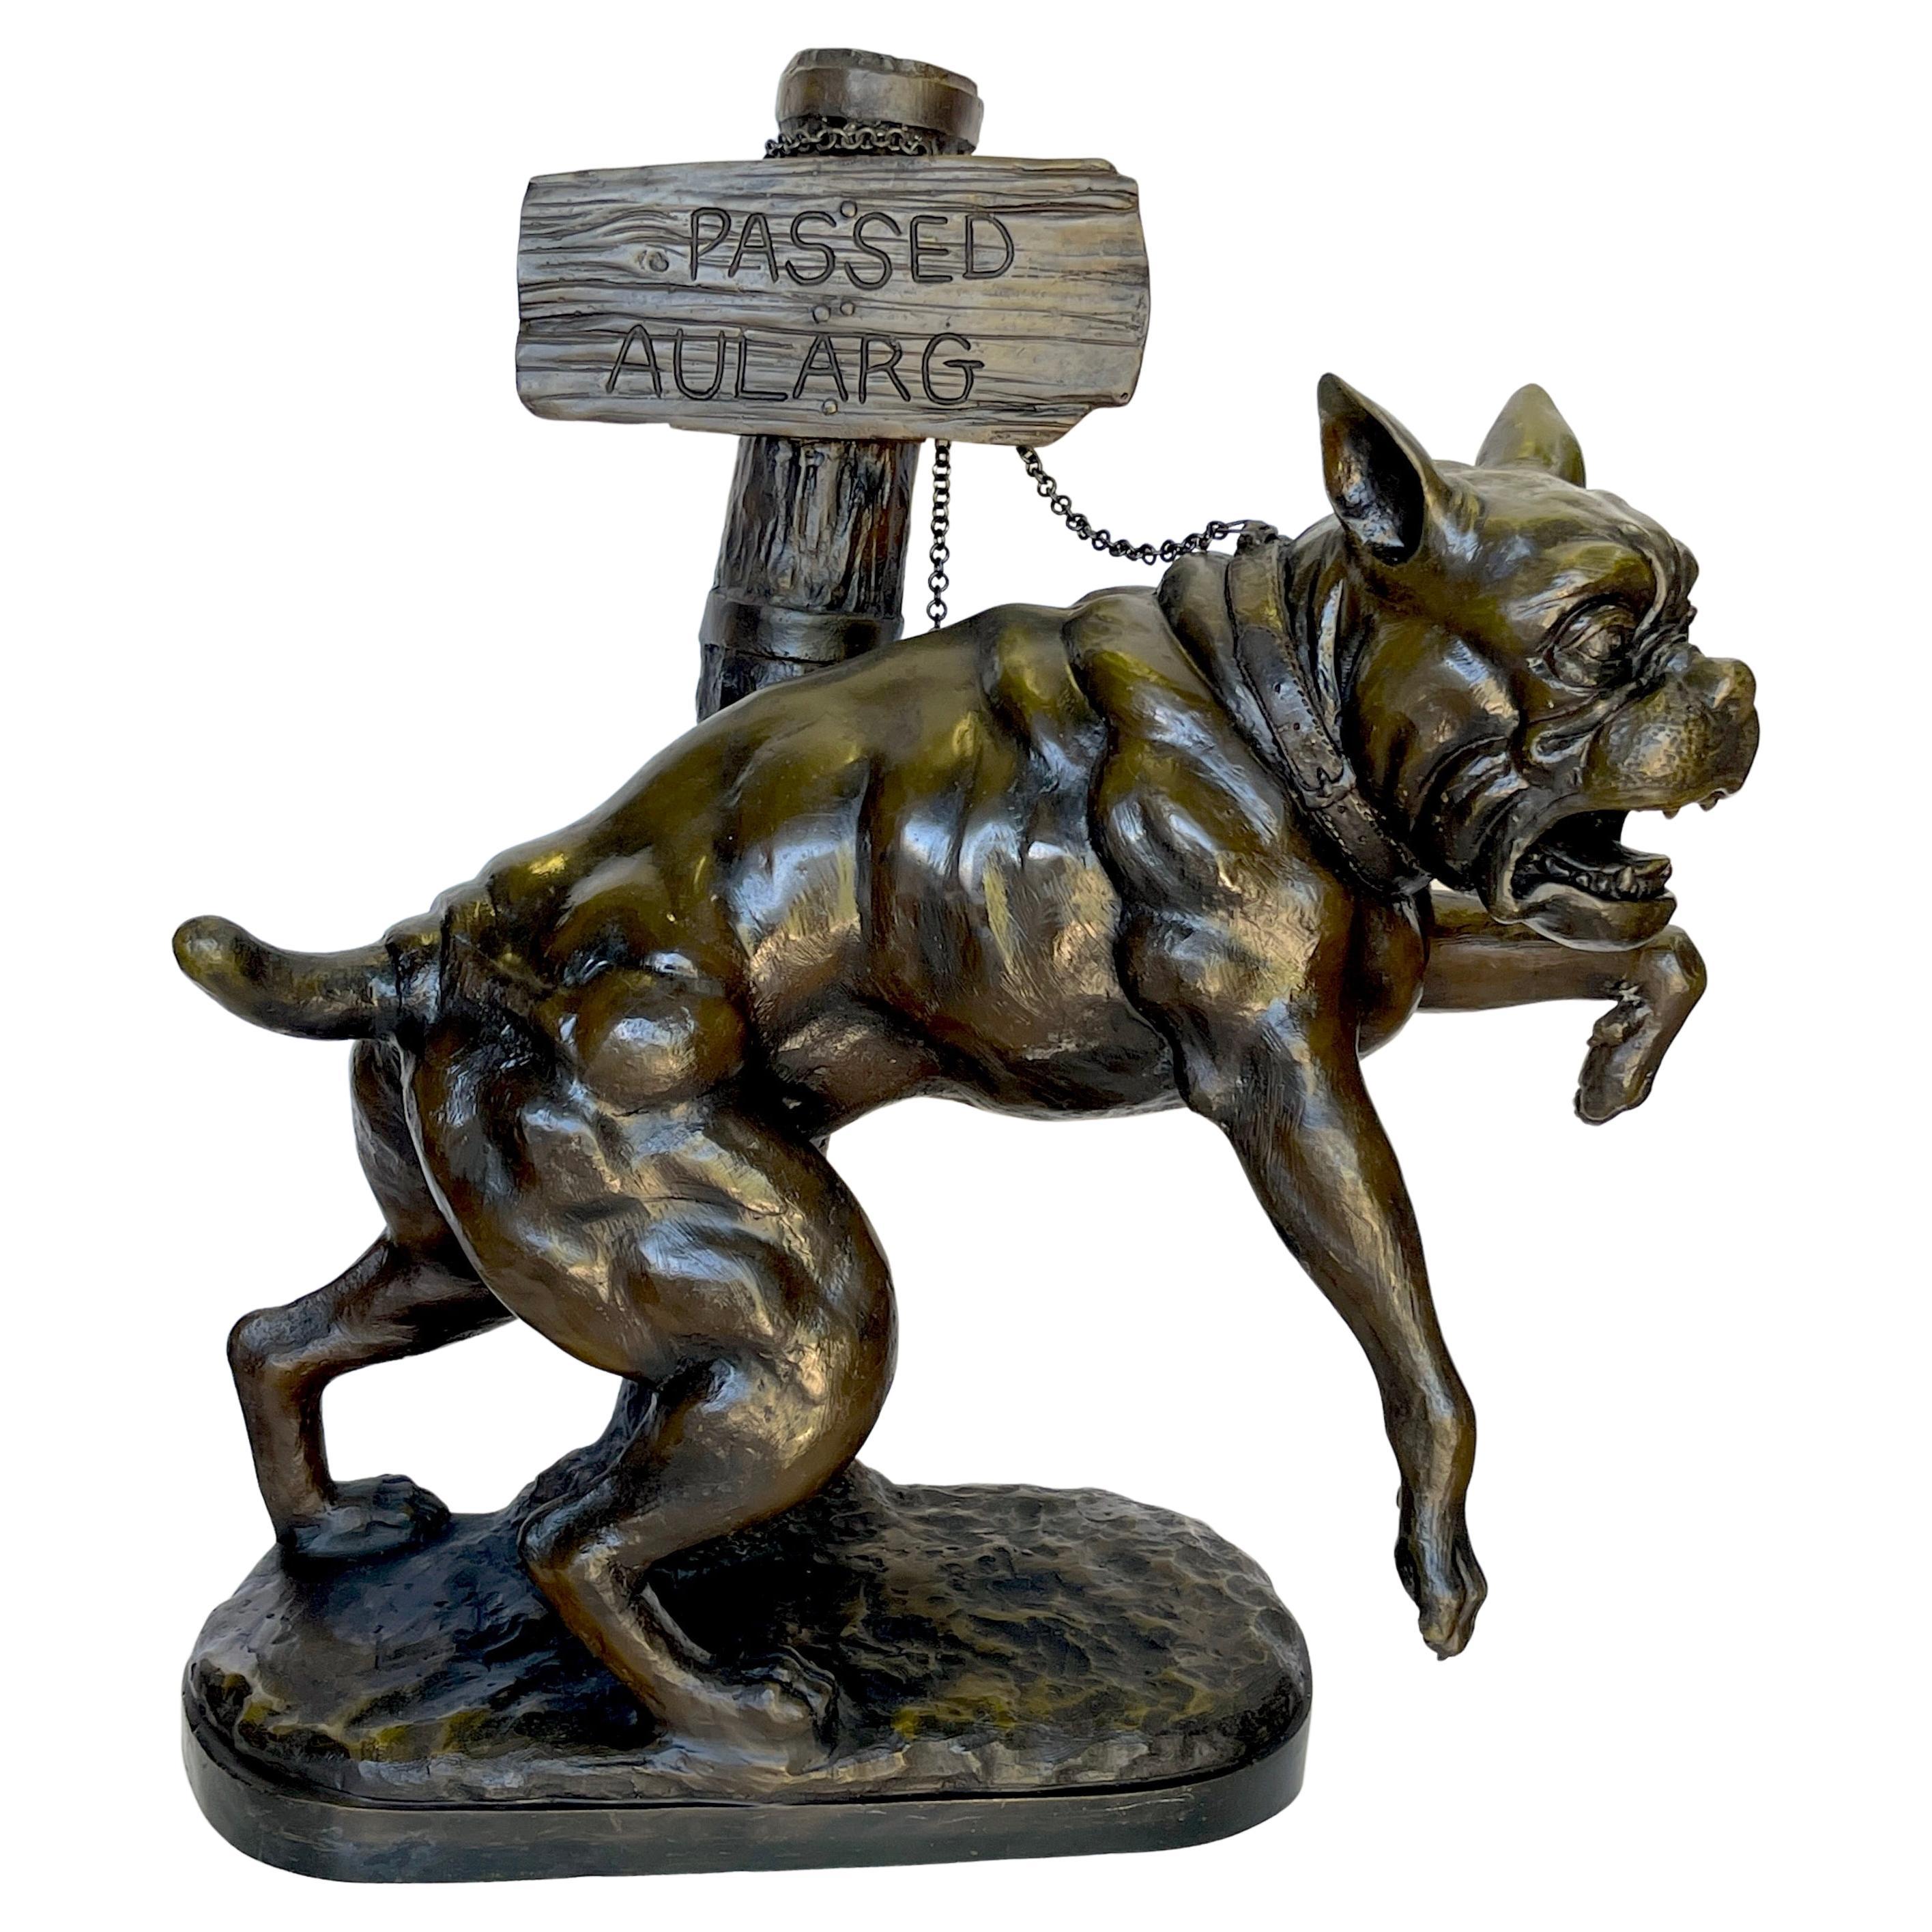 Mastiff on a Chain" Bronze Sculpture 'Largest Version' by Charles Valton  For Sale at 1stDibs